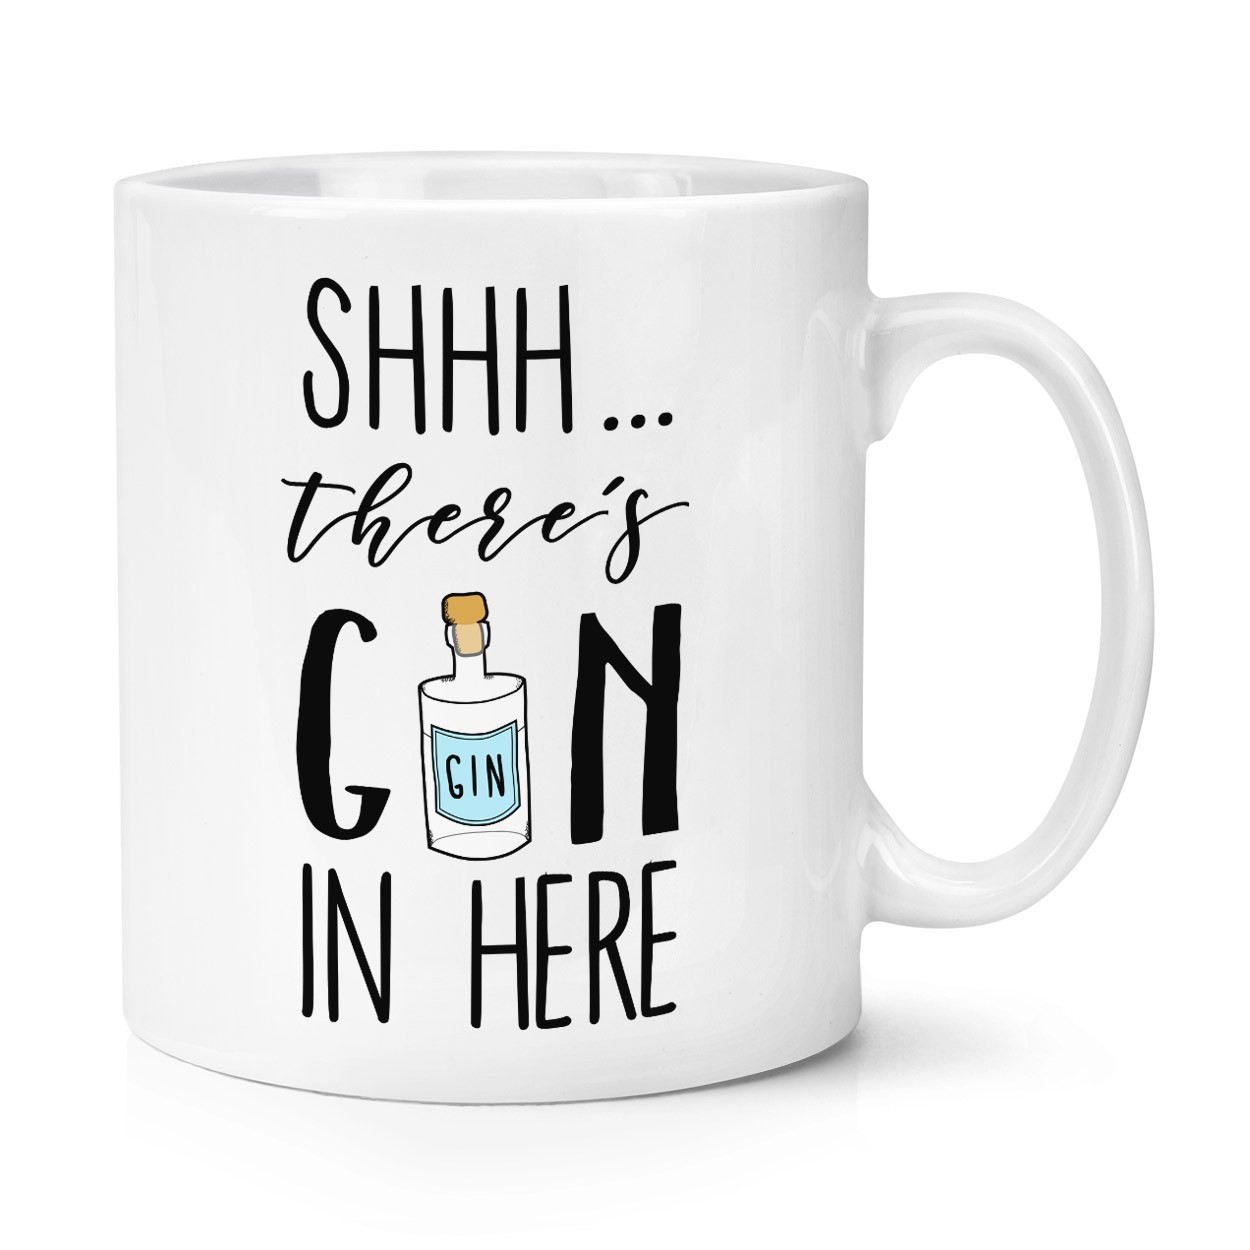 Shhh There's Gin In Here 10oz Mug Cup